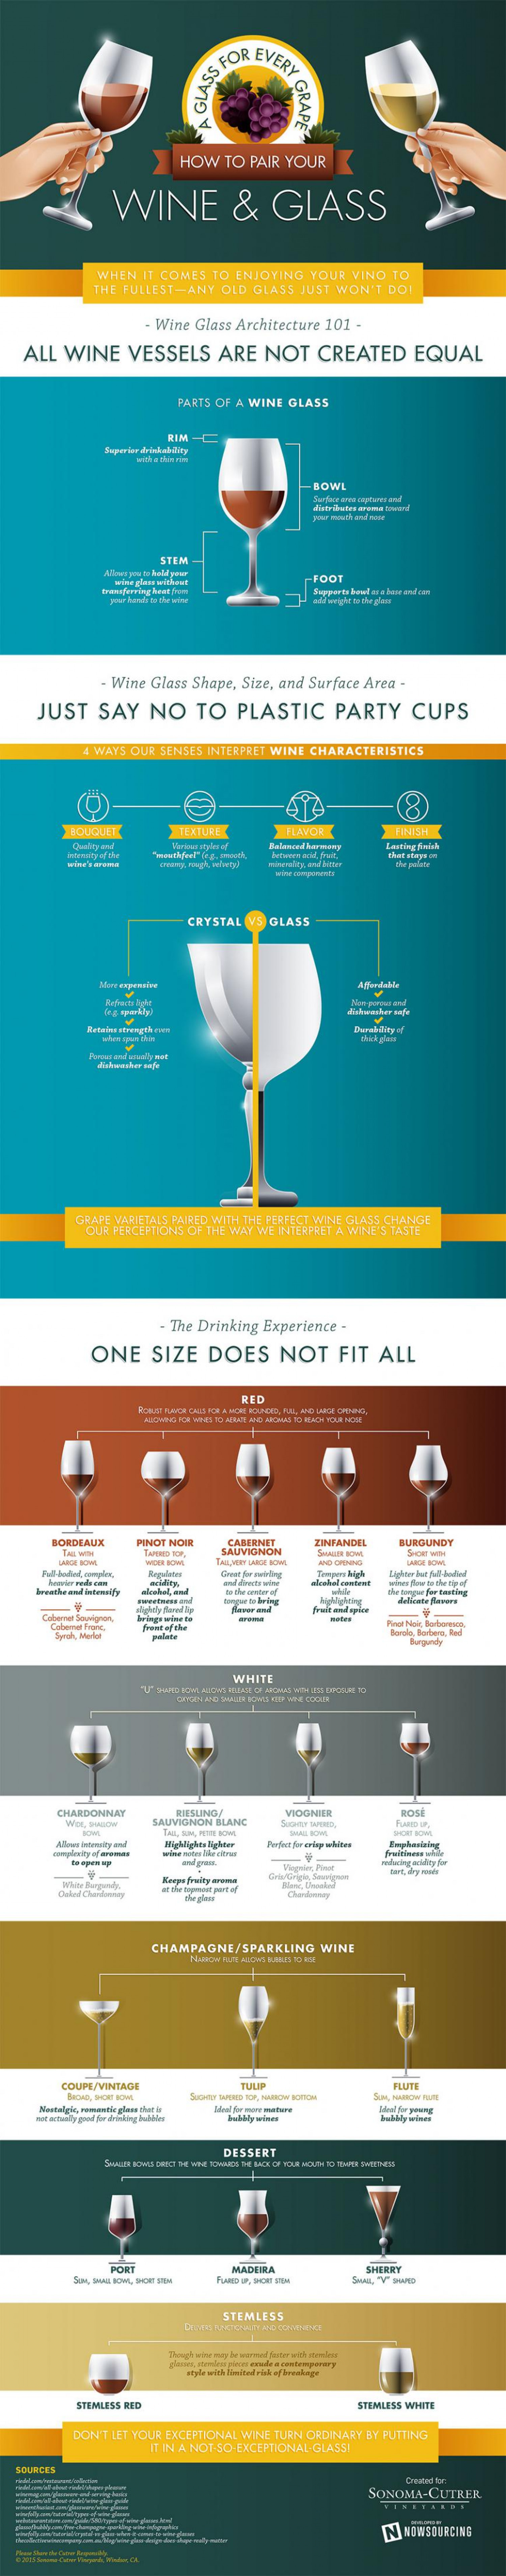 Pairing Grape To Glass Infographic